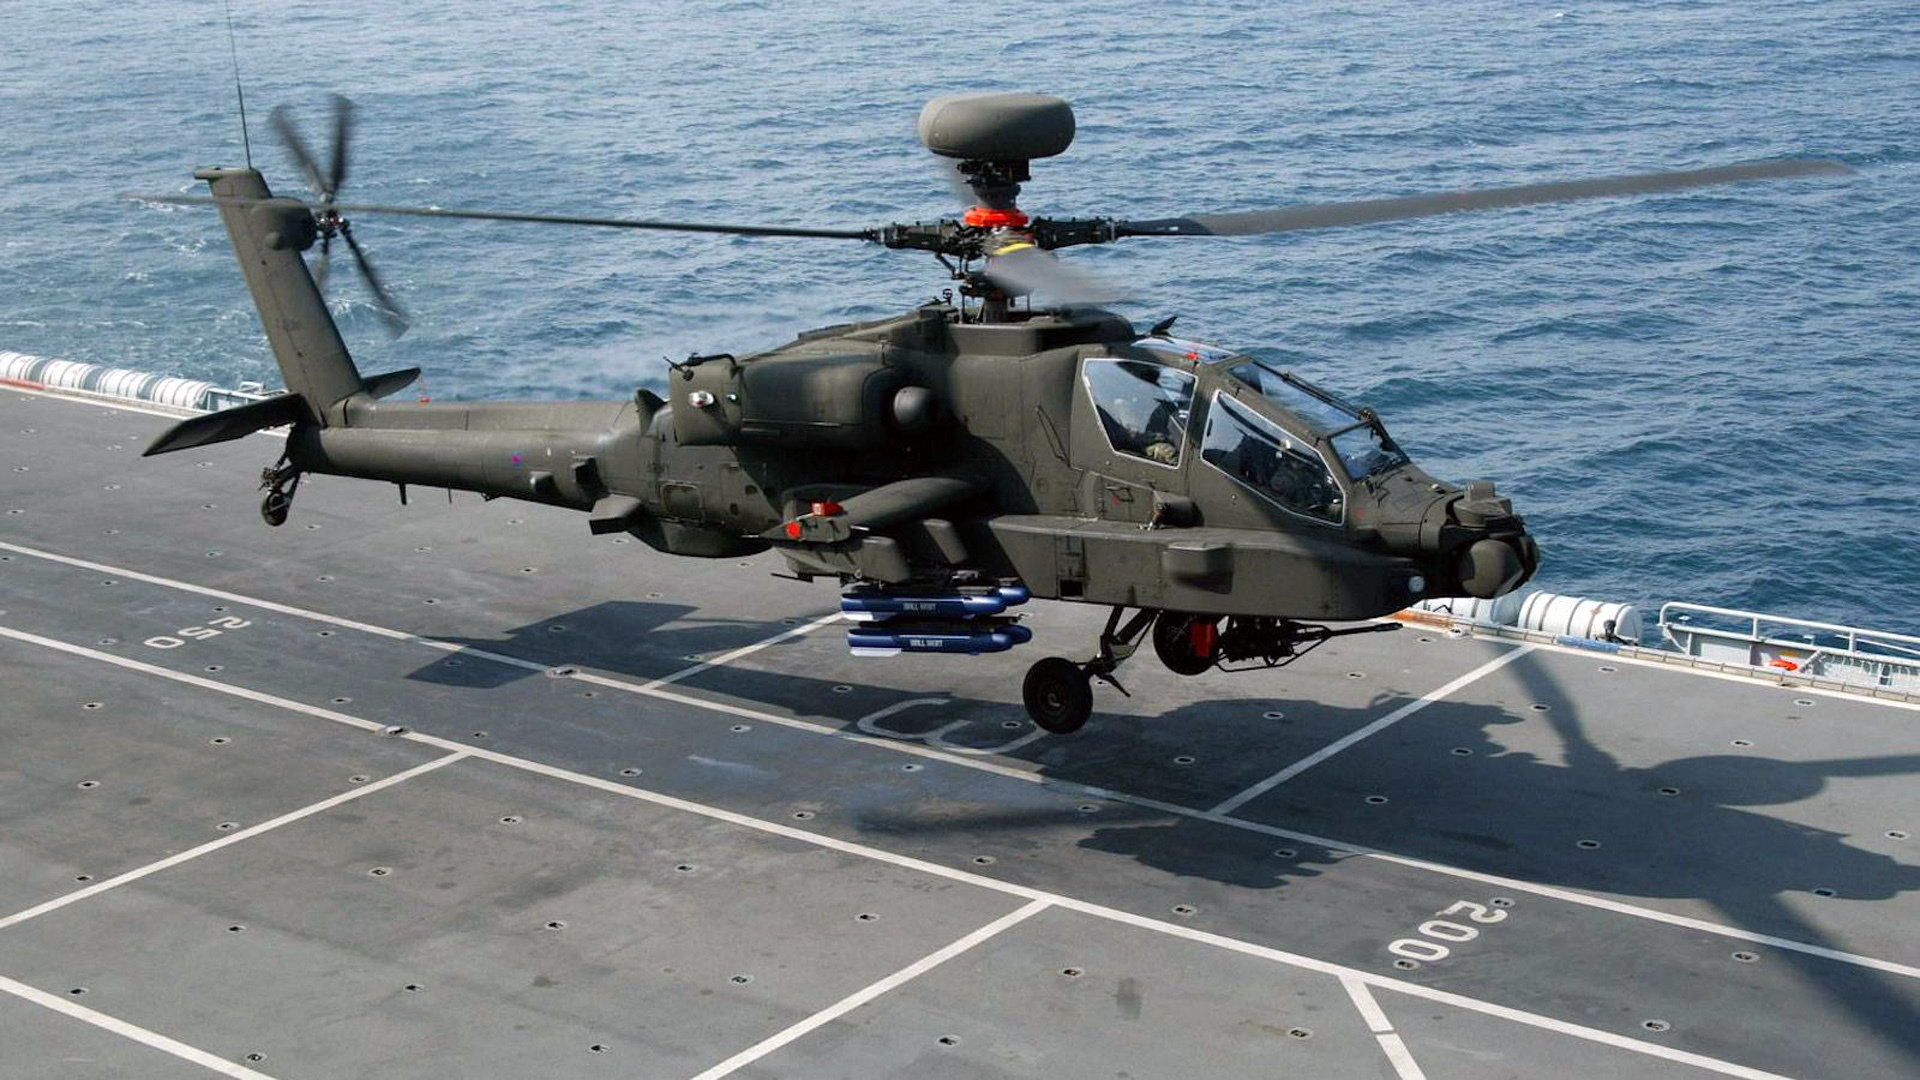 Awesome Boeing Ah 64 Apache Free Wallpaper Id 307907 For 1080p Pc Images, Photos, Reviews